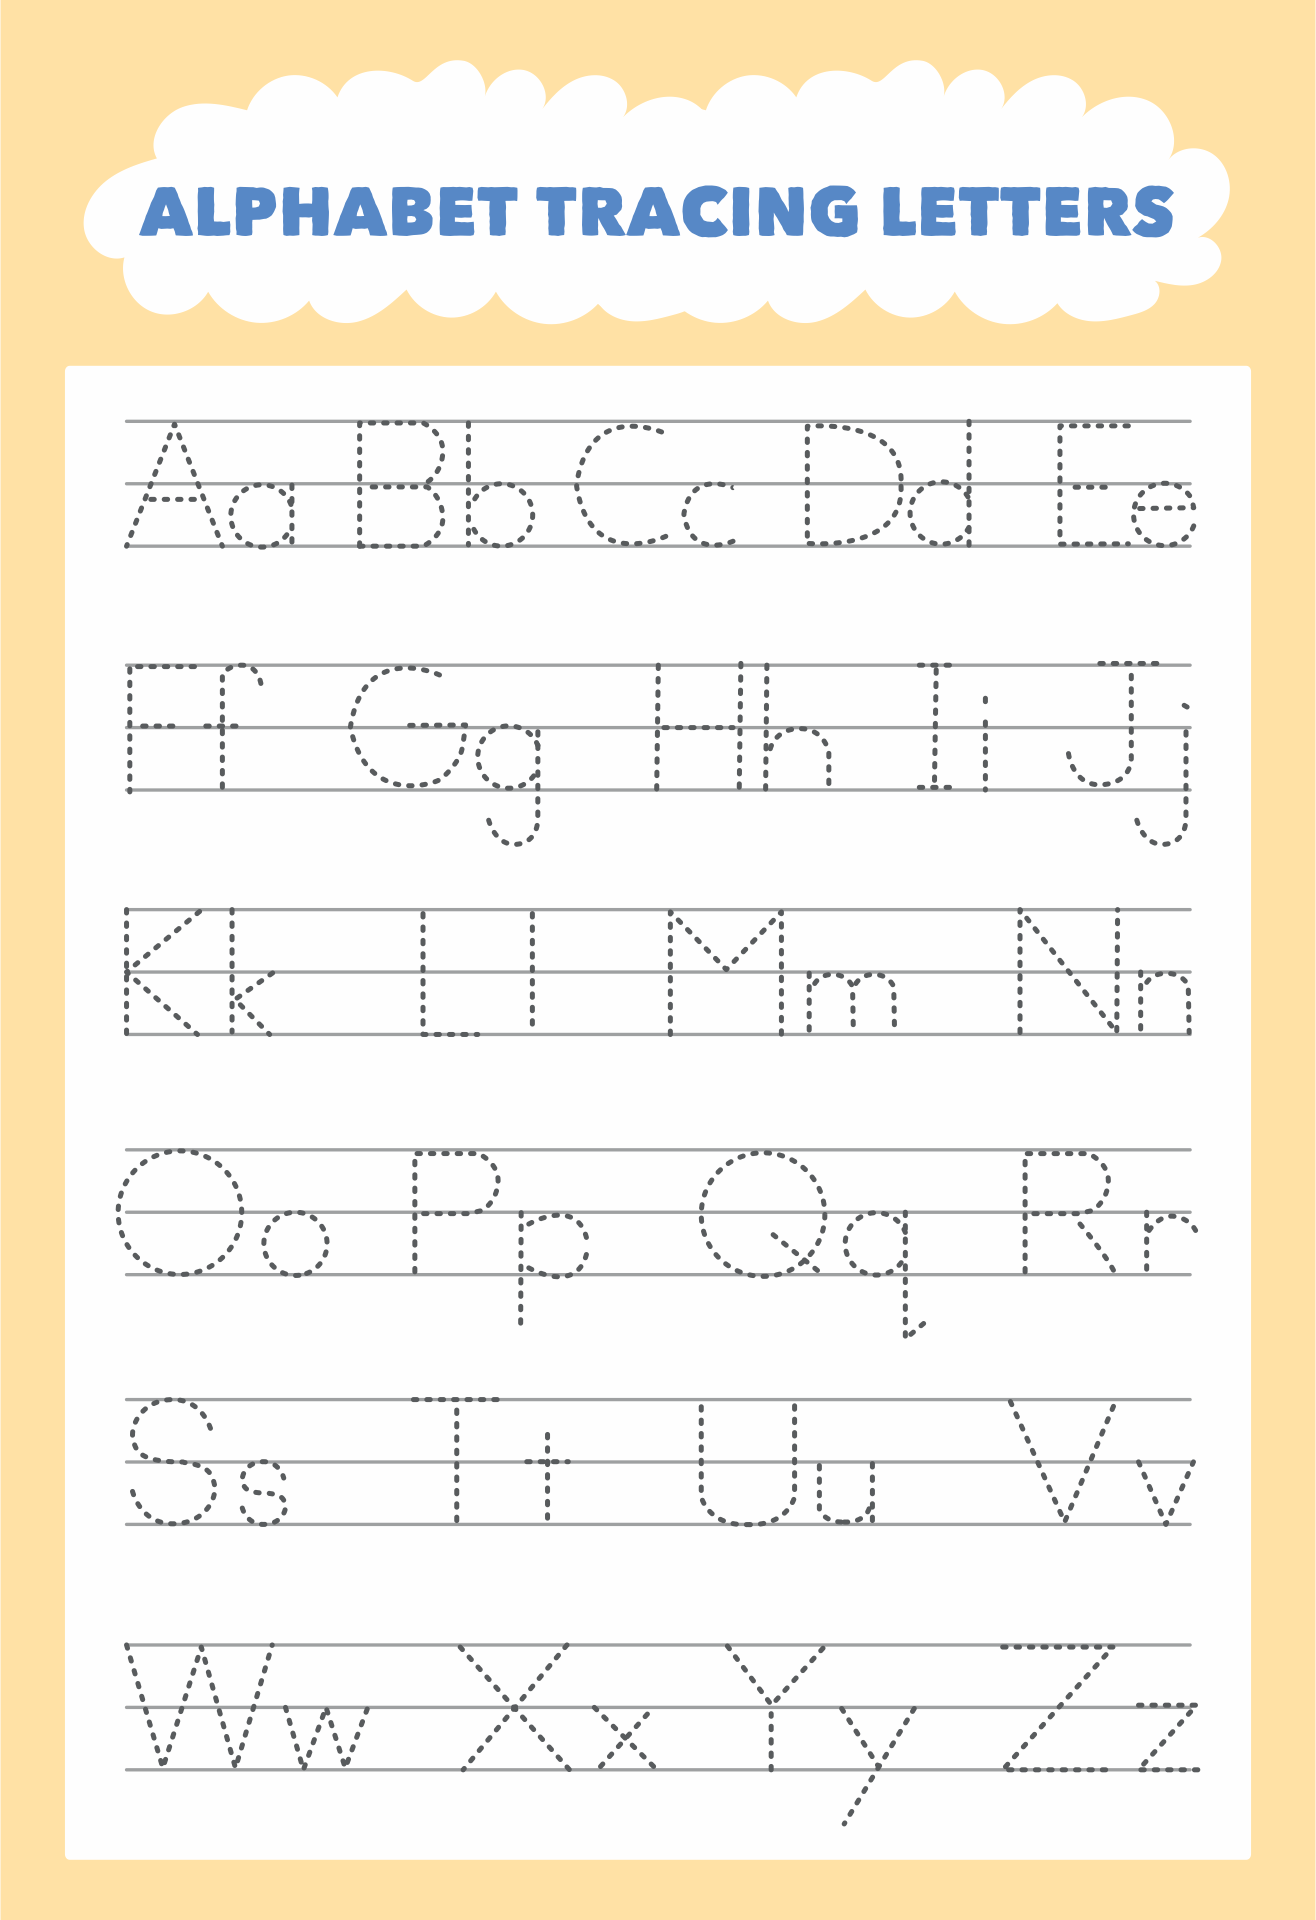 traceable-letters-printable-worksheets